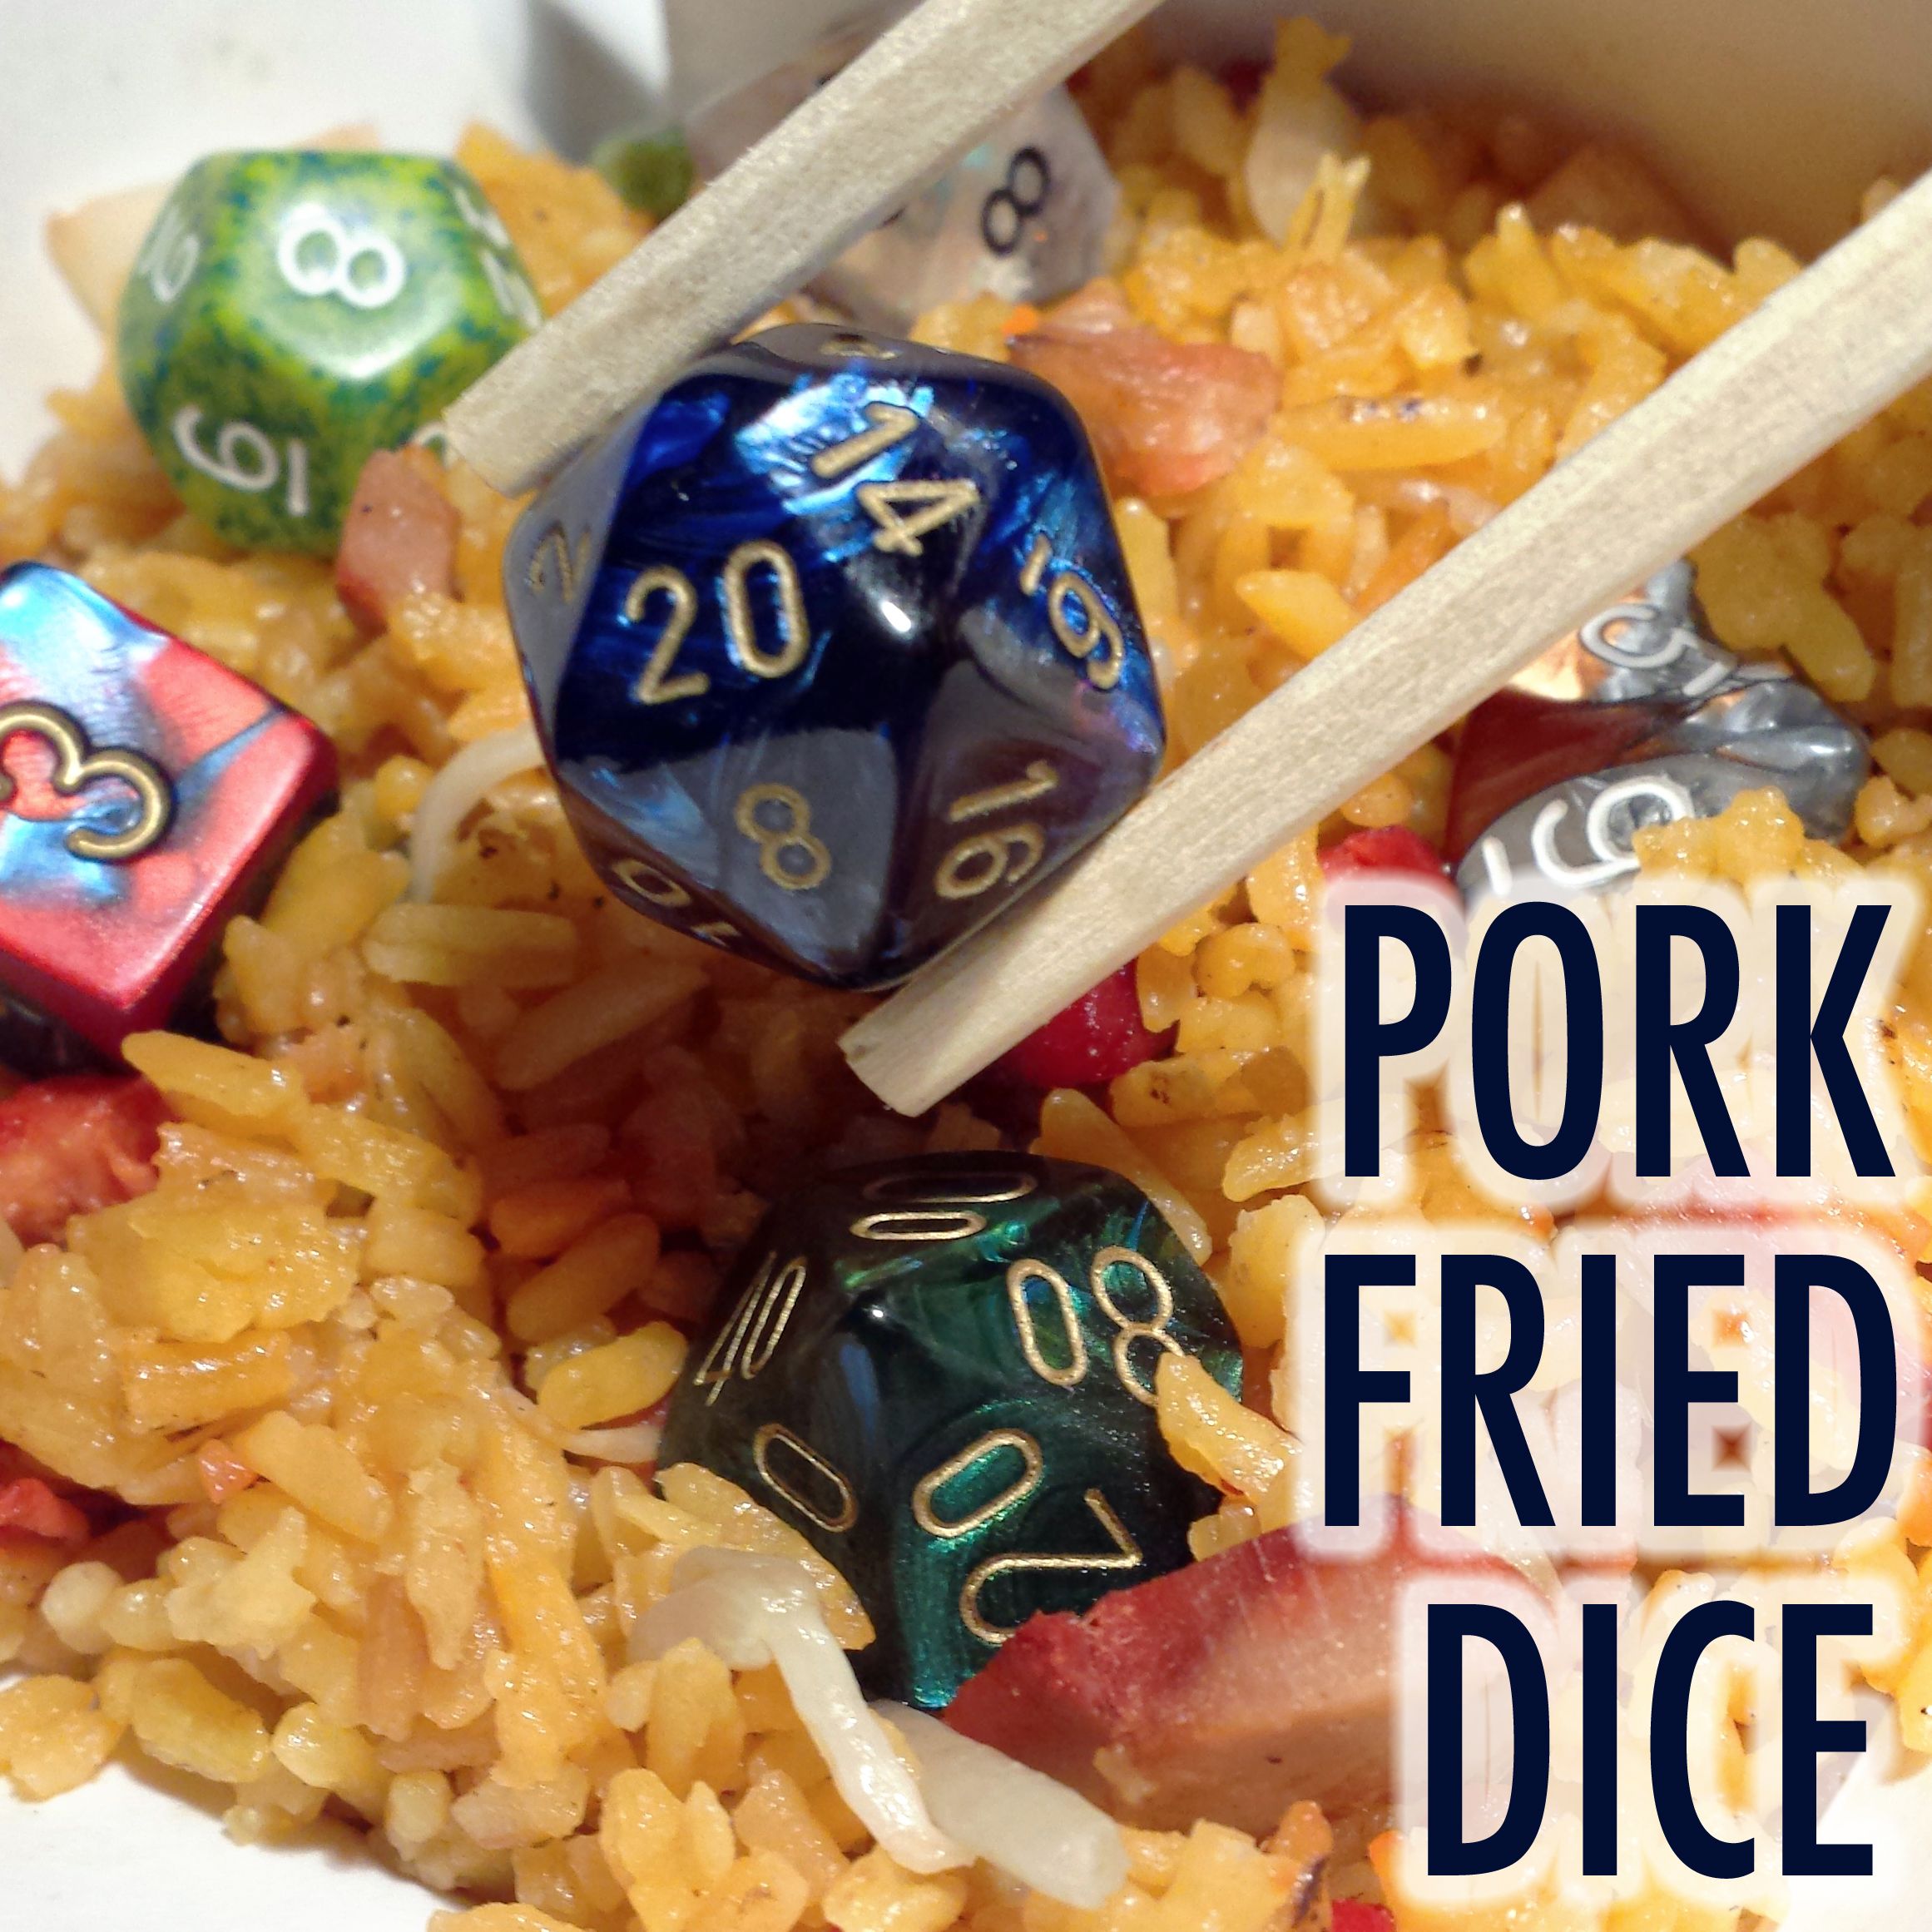 224: Pork Fried Dice: A Pay-To-Play Game